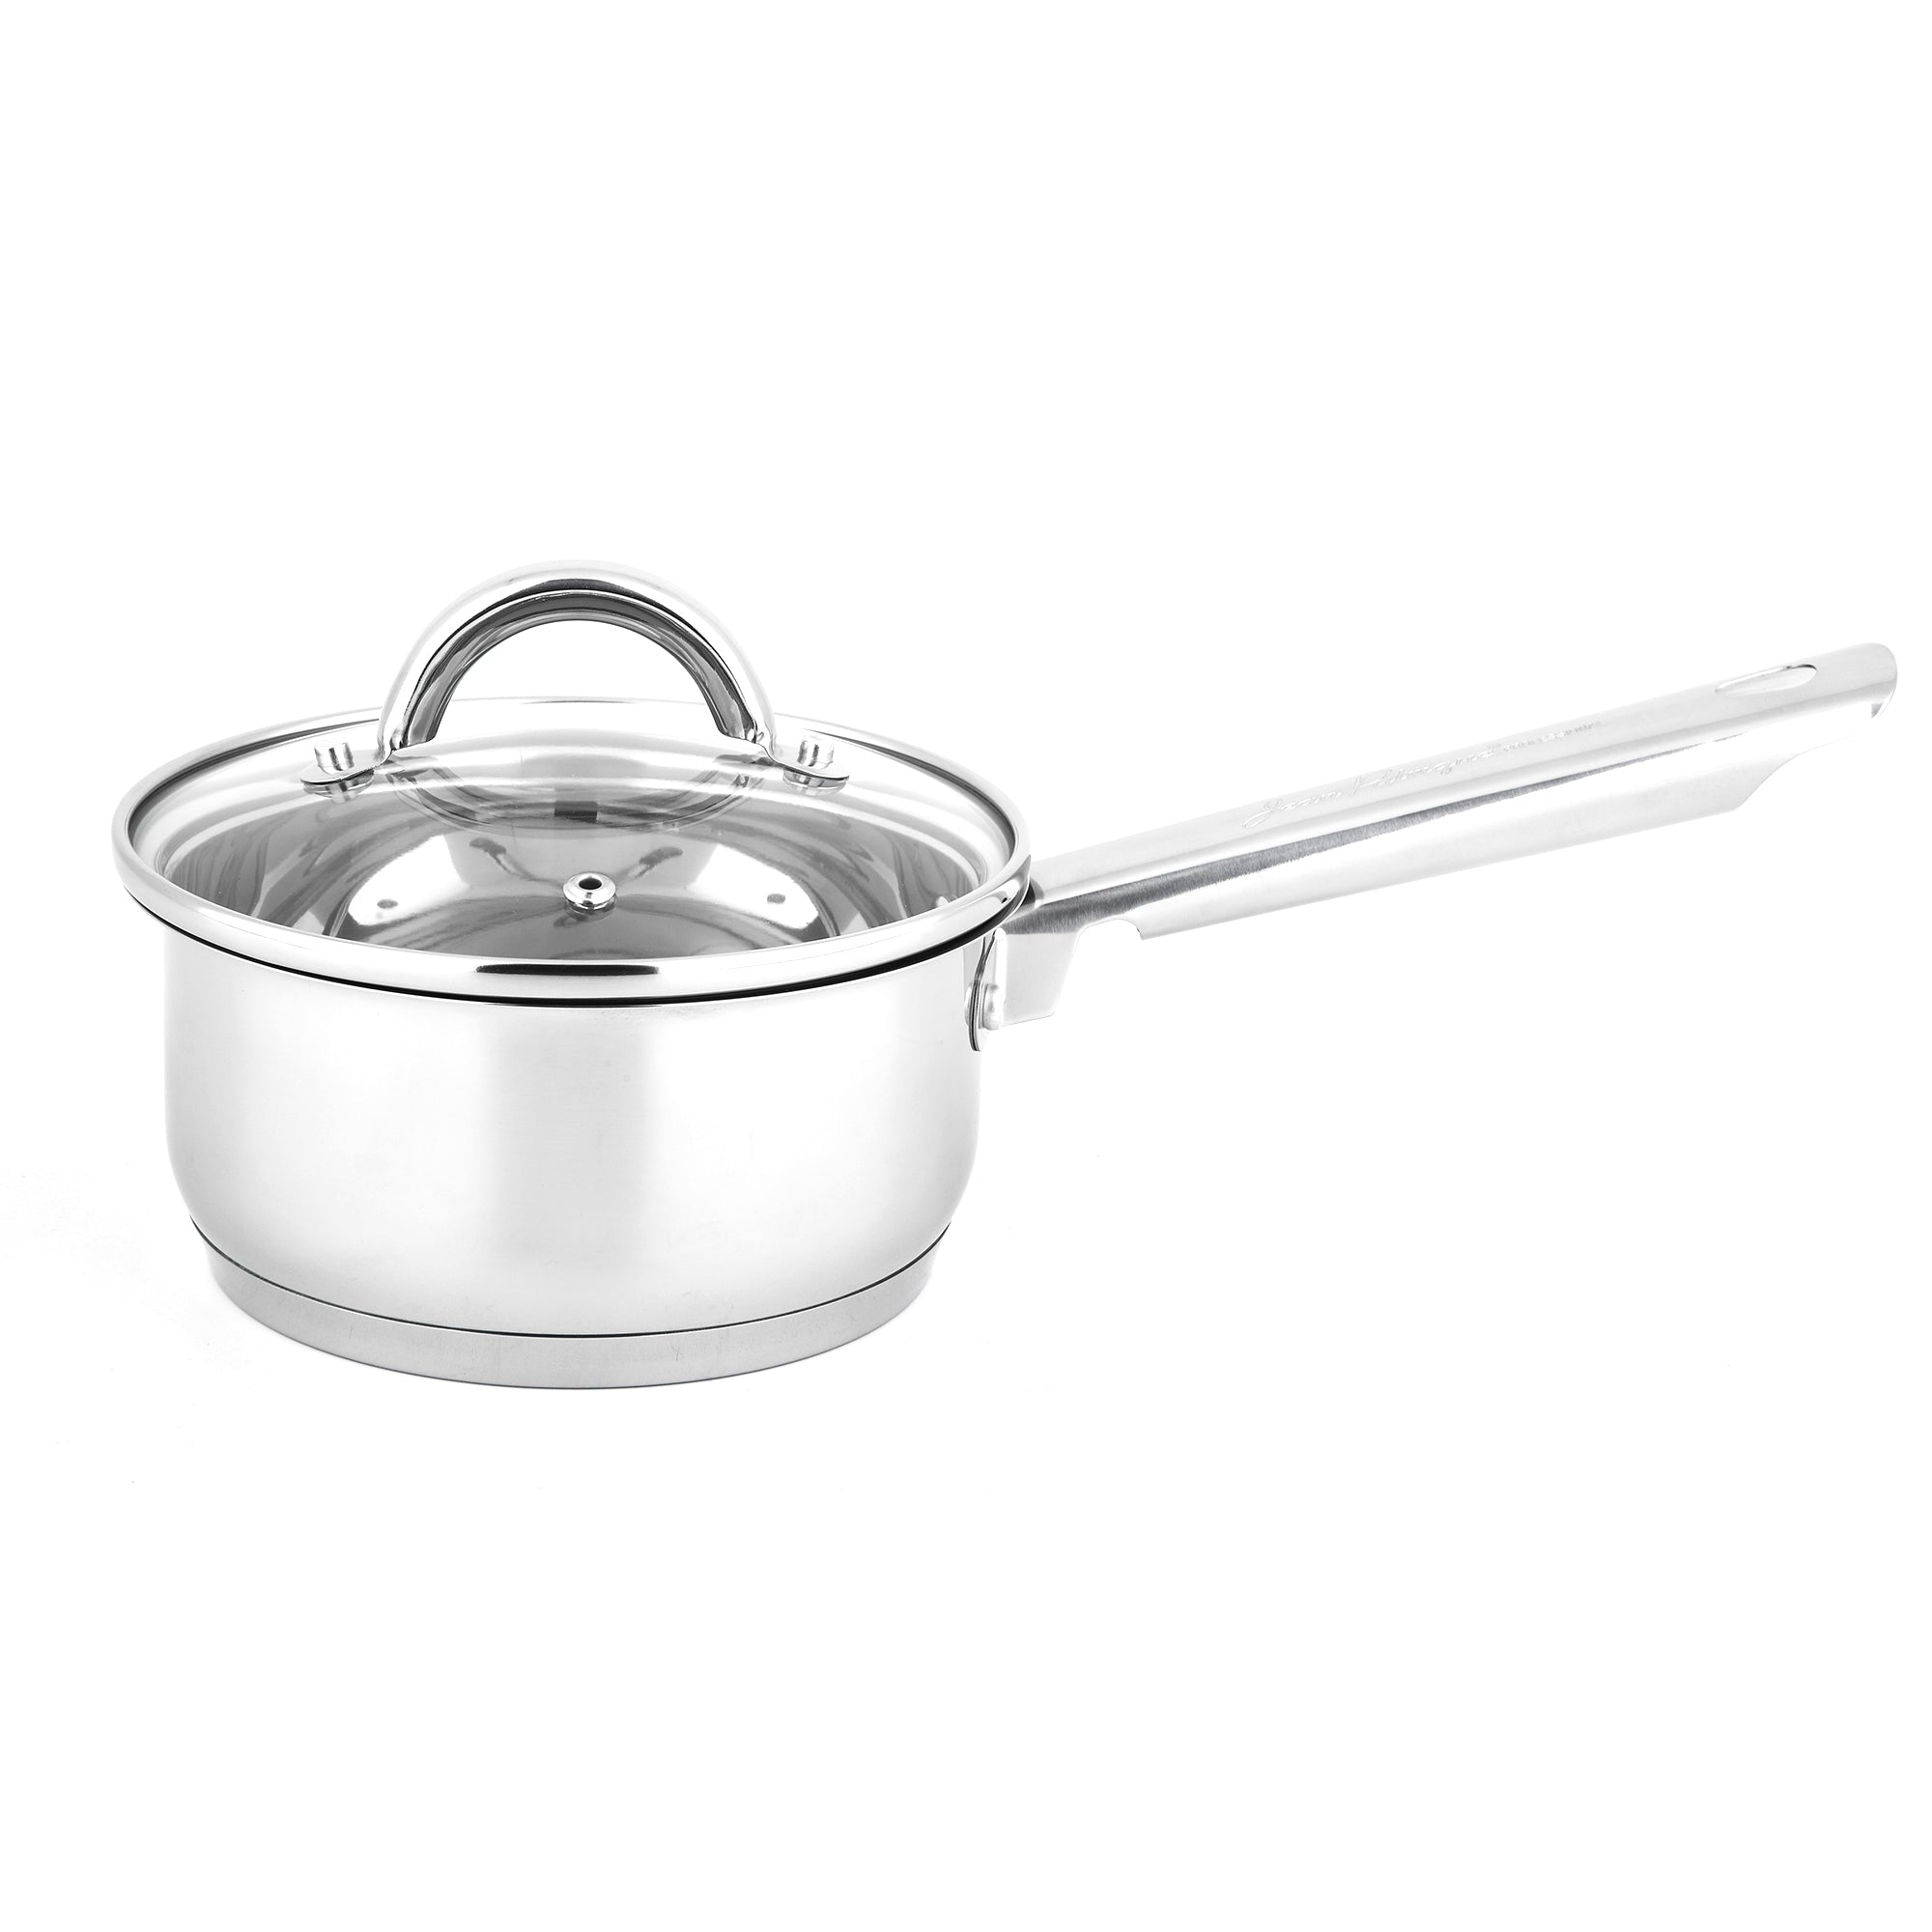 JEAN PATRIQUE cookware set - 15 piece use with any stove or oven non-stick  kitchen cookware set superior stainless steel nonstick pots and